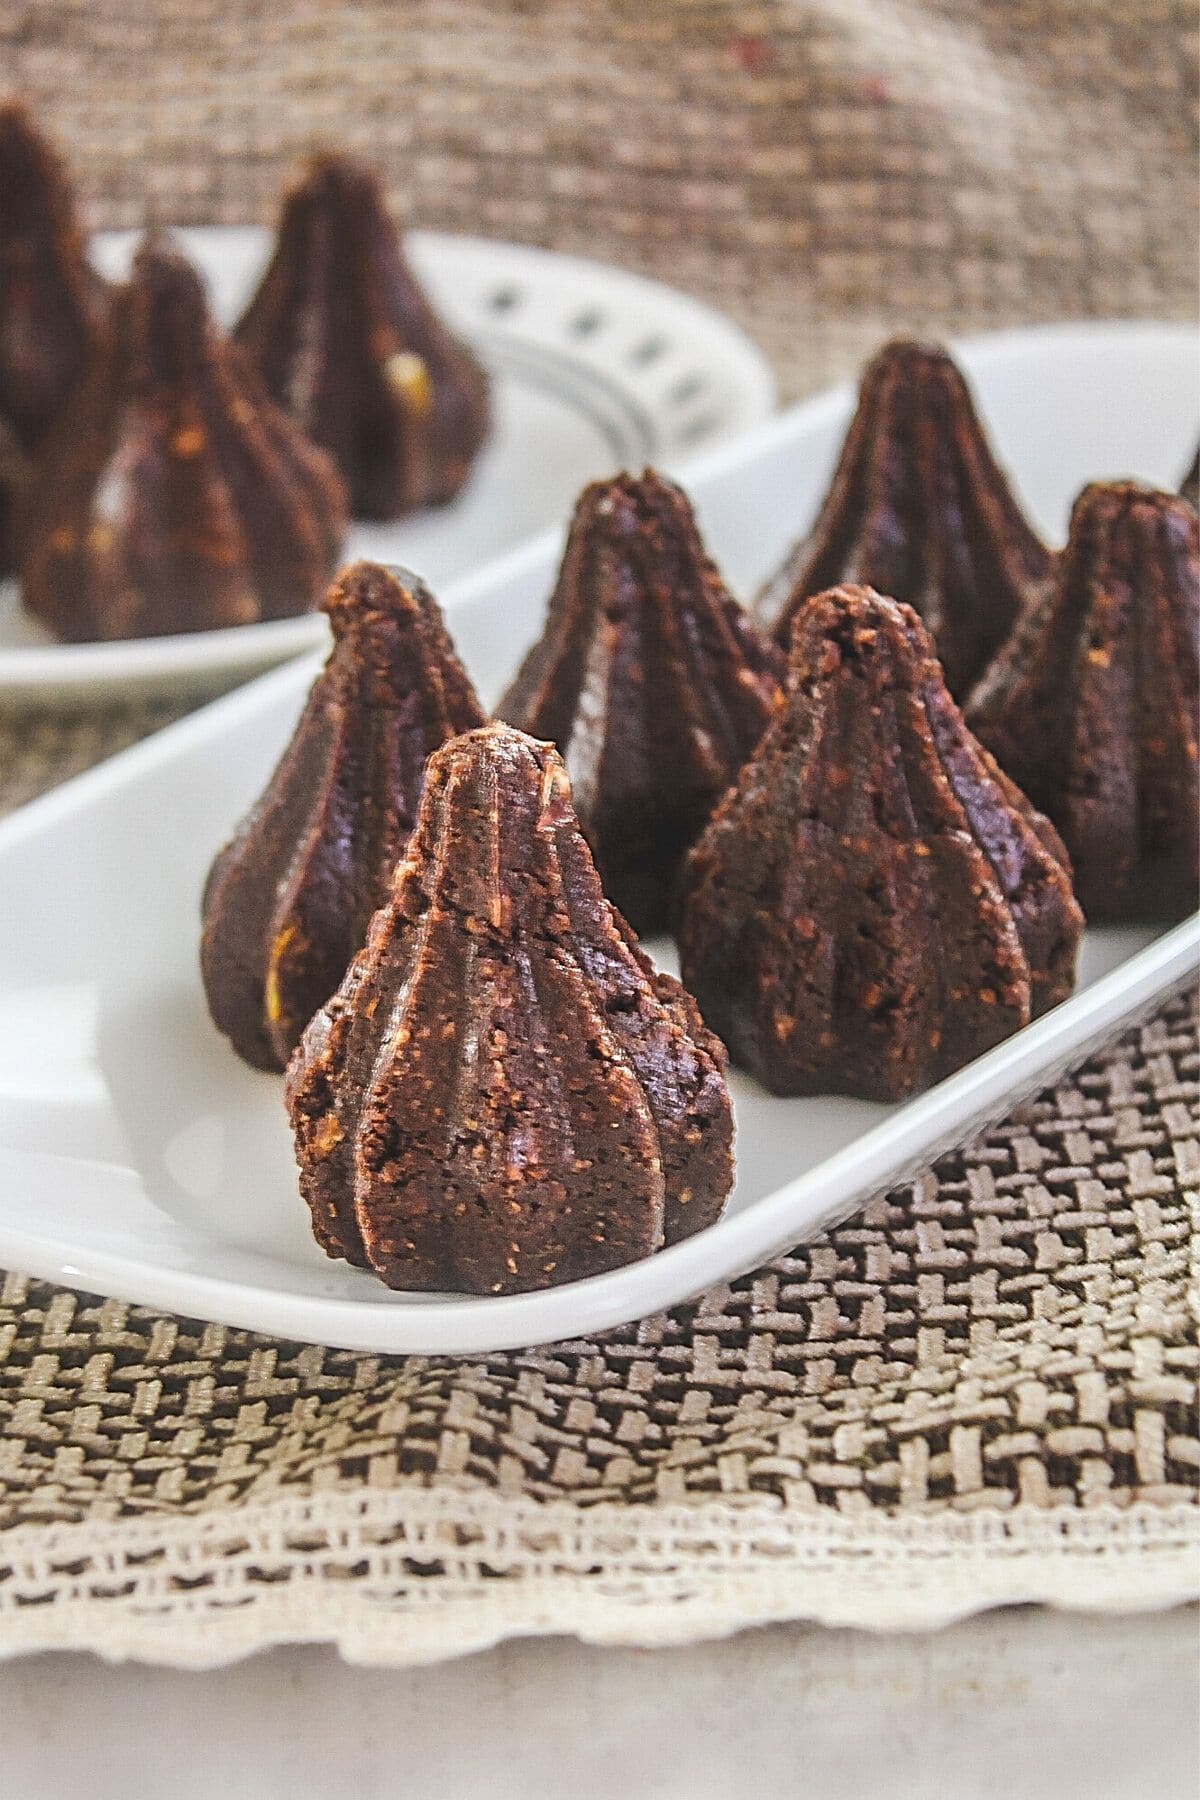 Image of chocolate modak arranged on a white plate with few modak in another plate place on the back side.